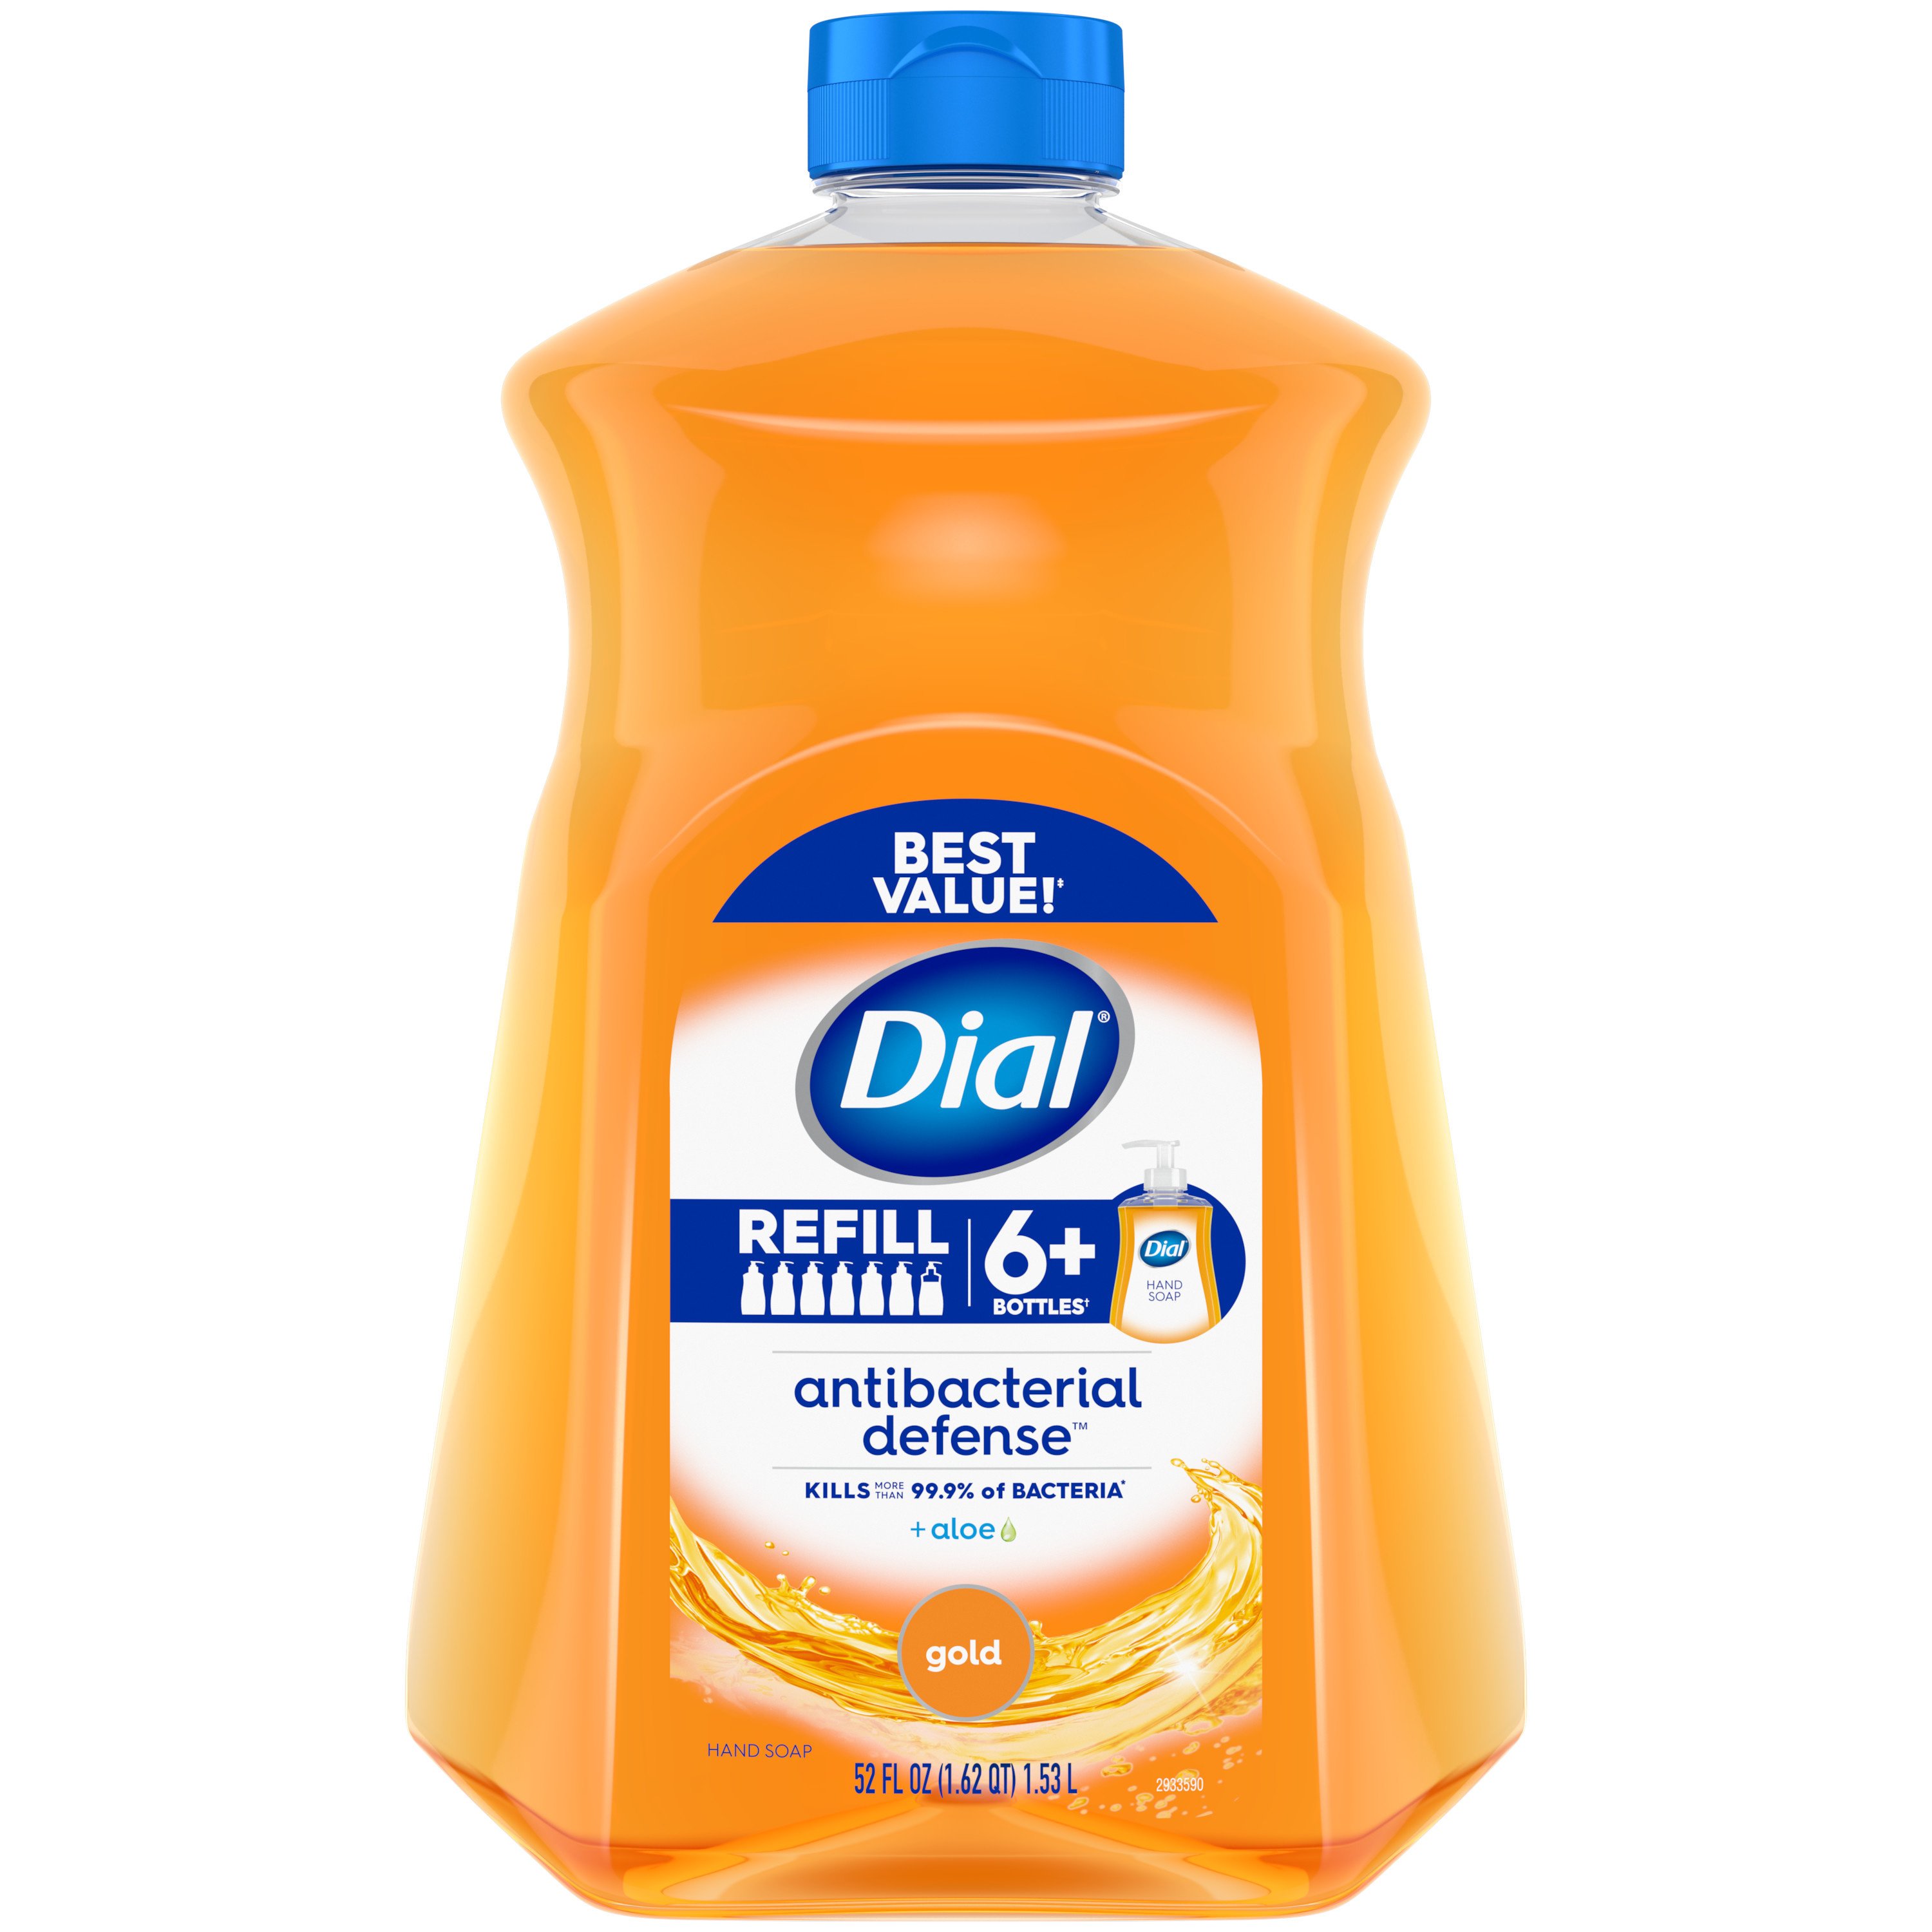 Dial Gold Antibacterial Hand Soap Refill Shop Cleansers Soaps At H E B